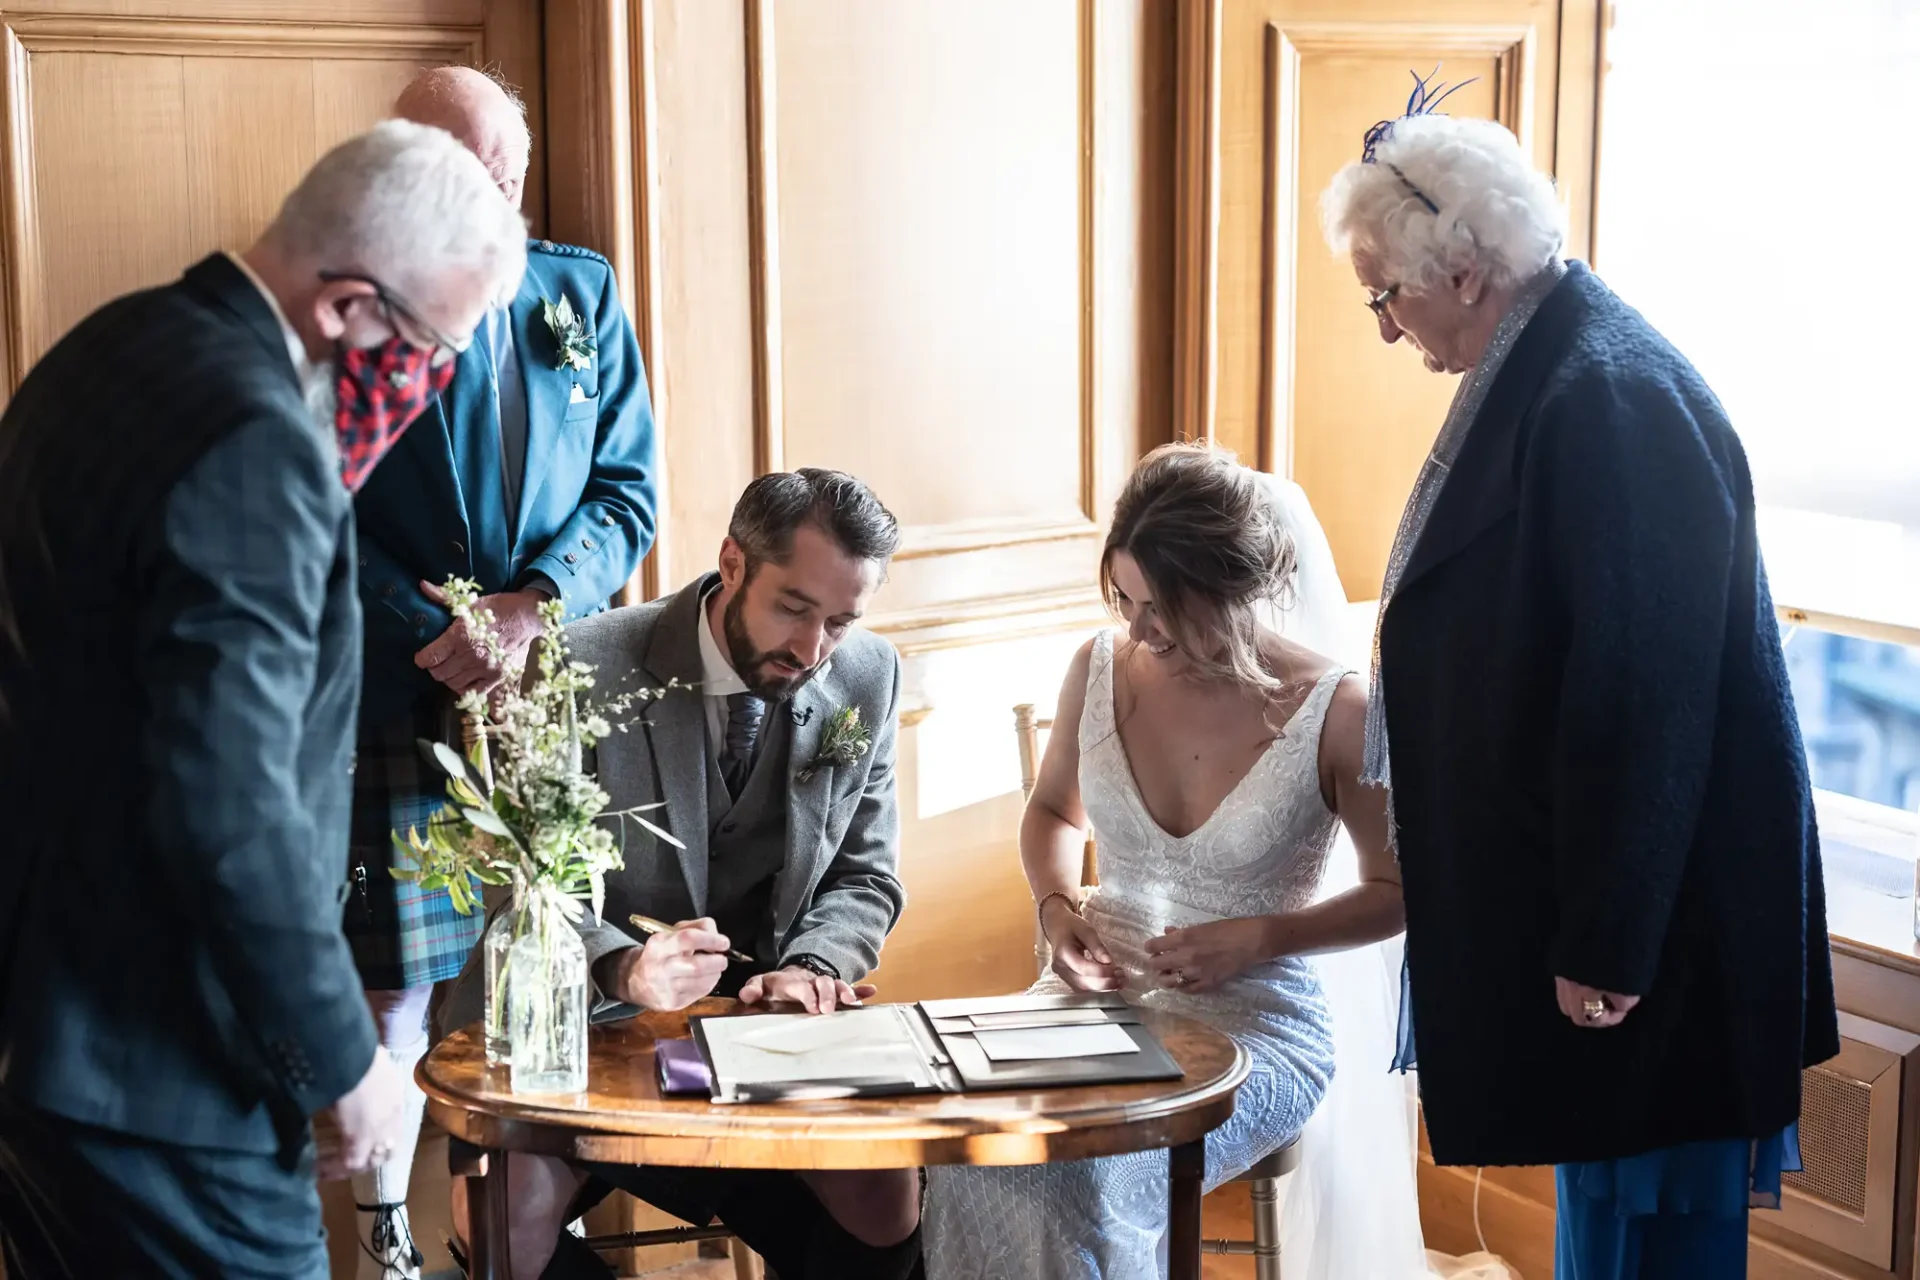 A bride and groom sign a registry at a small table, watched by three older guests, in an elegantly lit room.